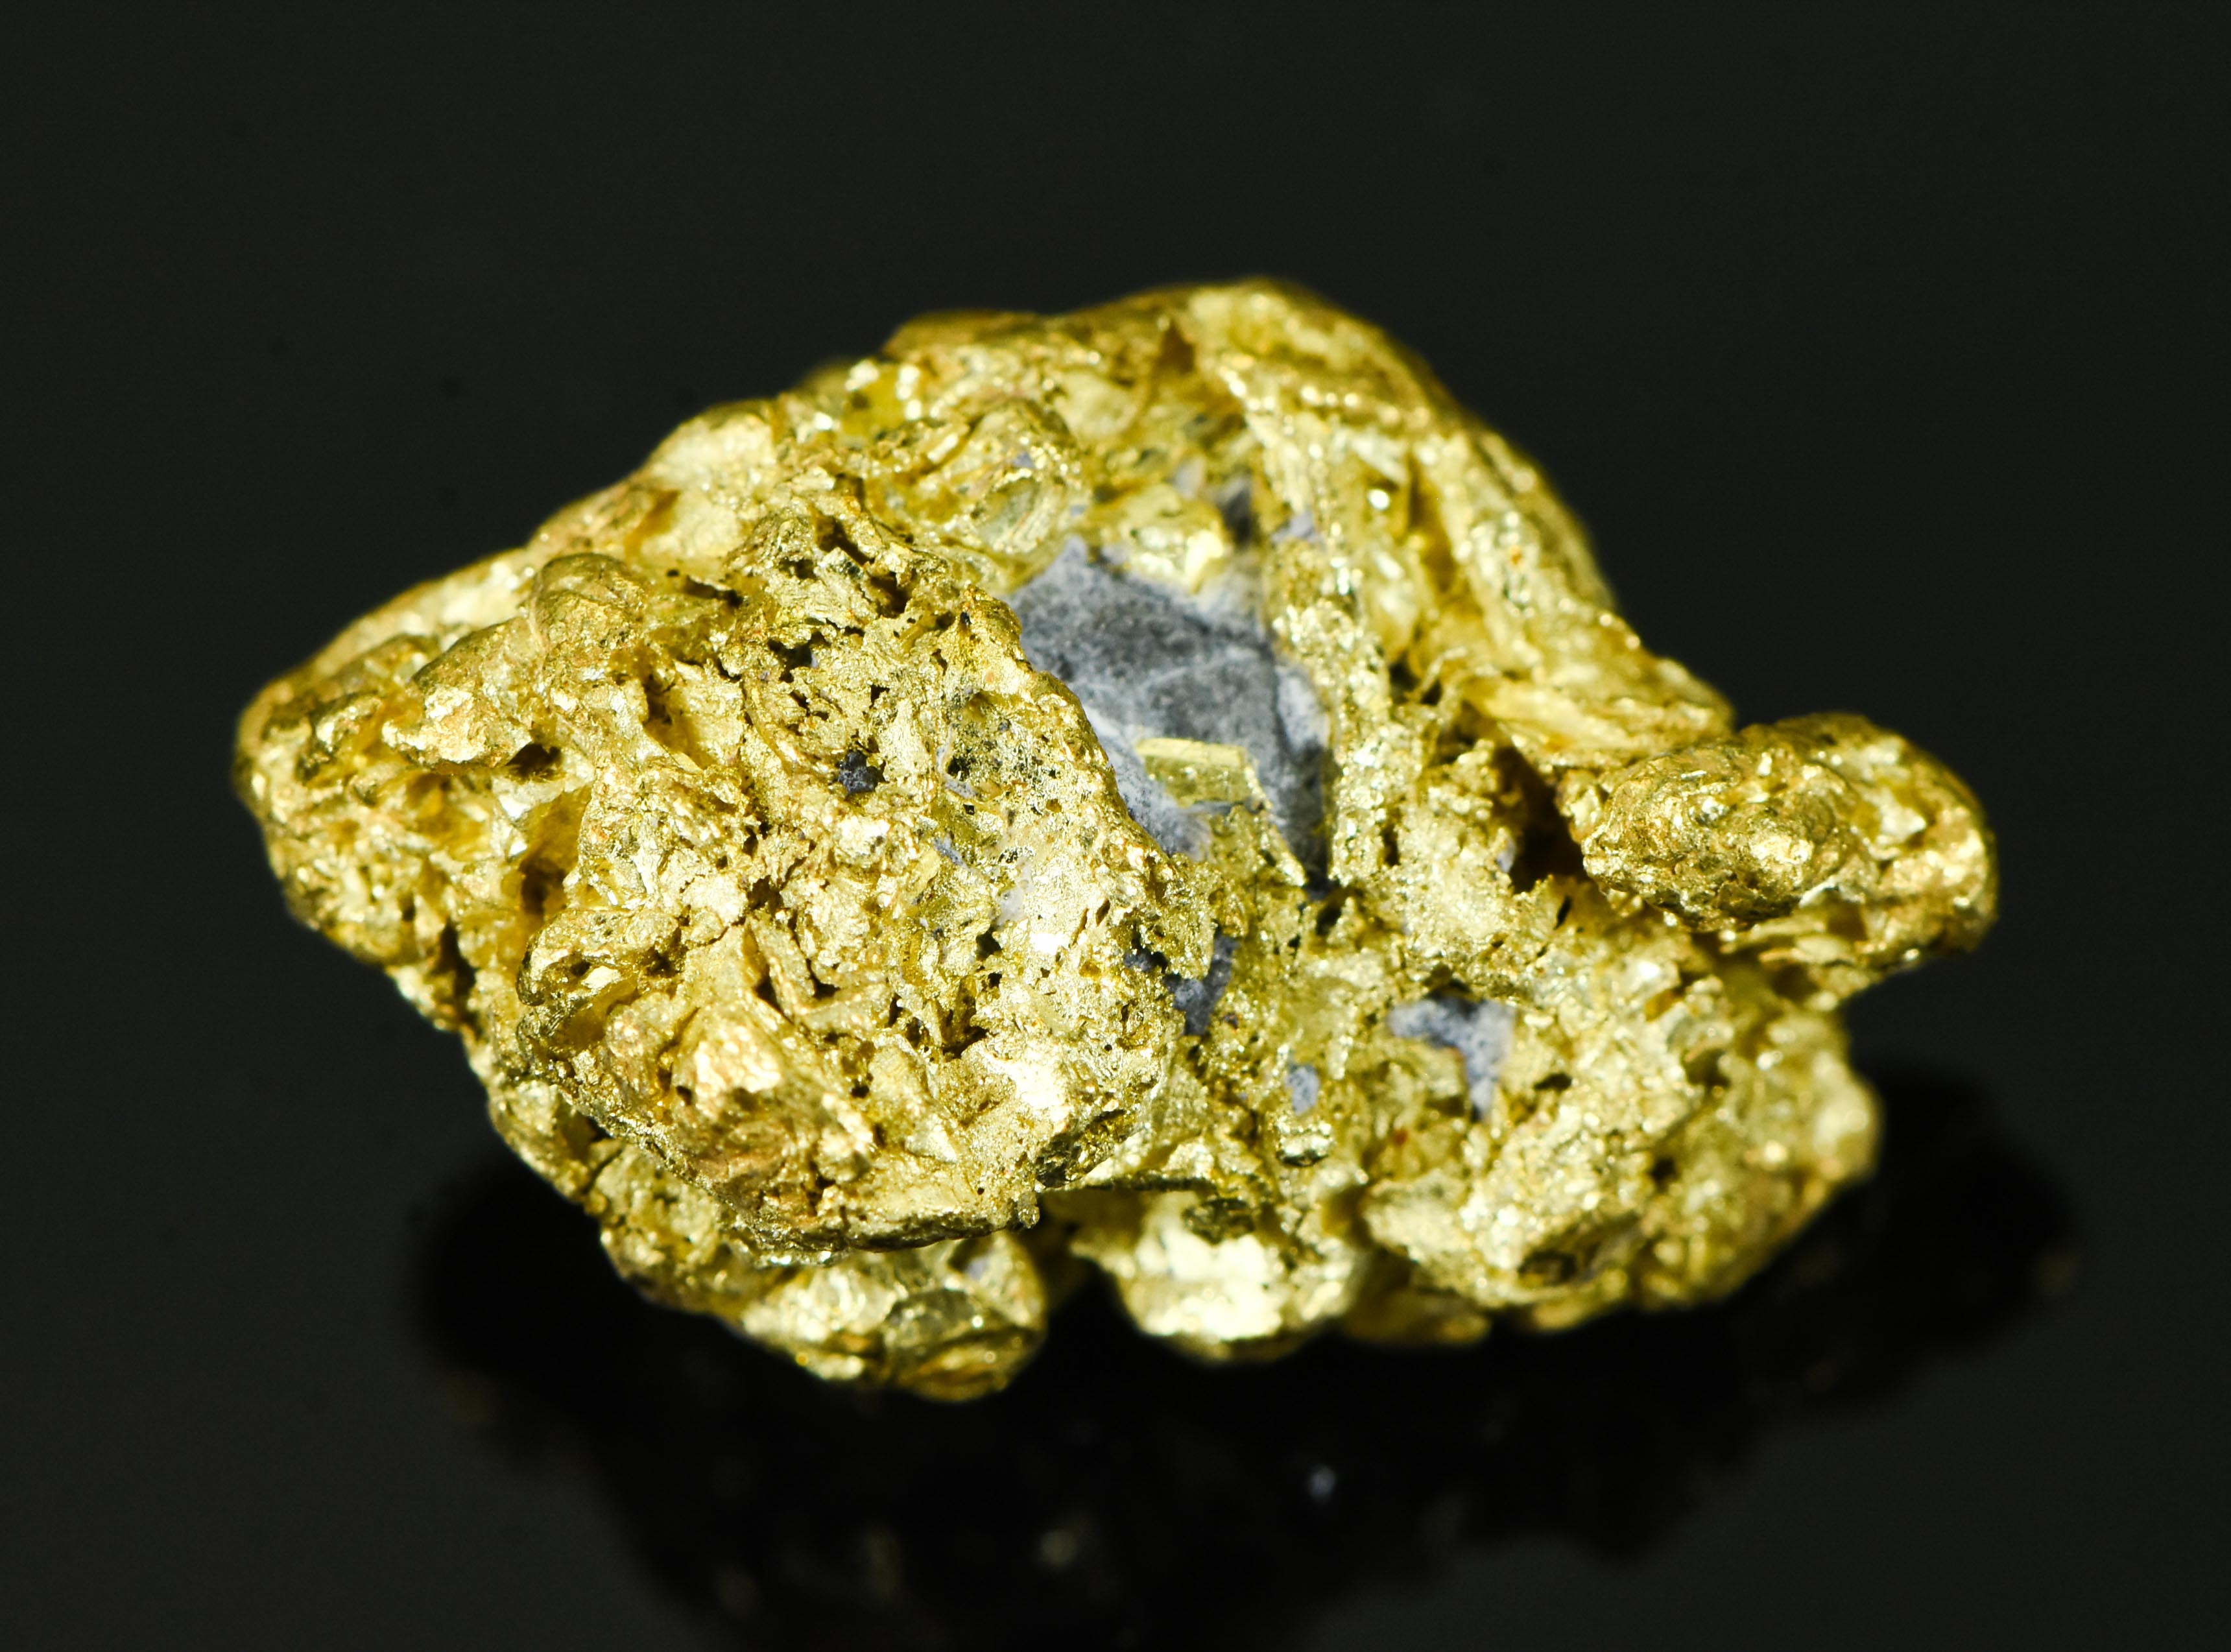 L-10 Alaskan BC Exotic Shaped Gold Nugget "Special Collection" 7.53 Grams